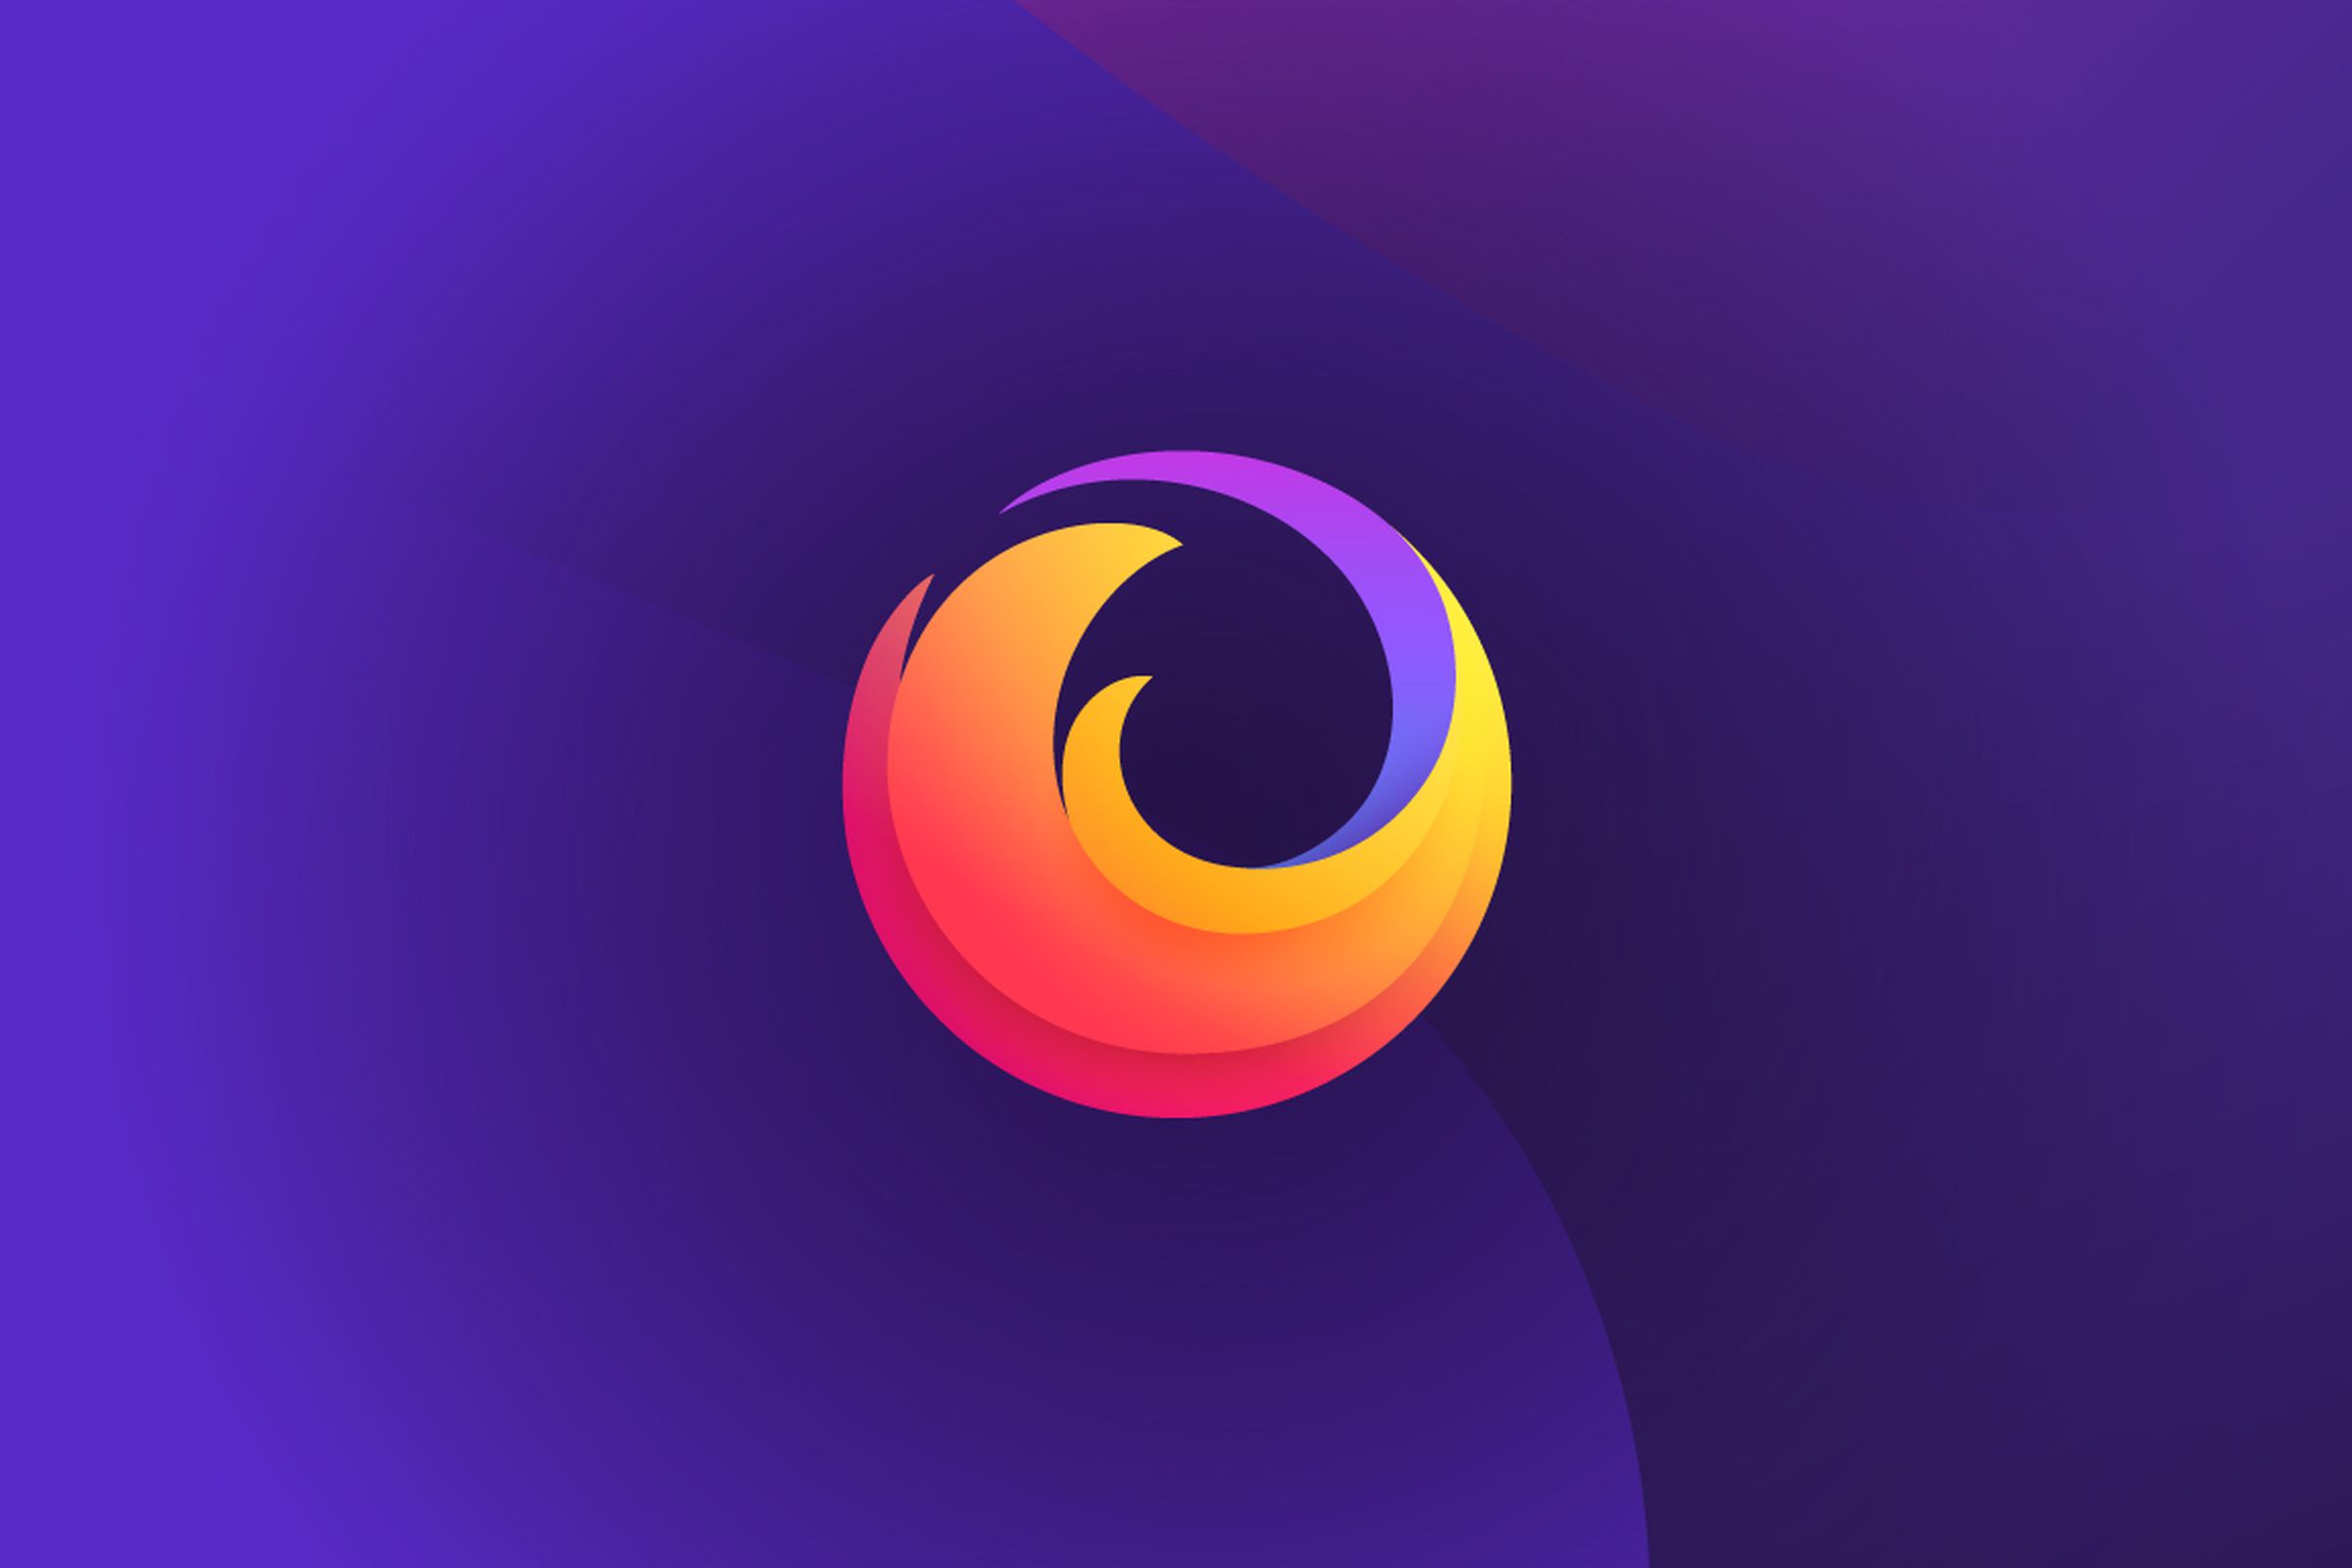 Firefox found a way to keep ad-blockers working with Manifest V3